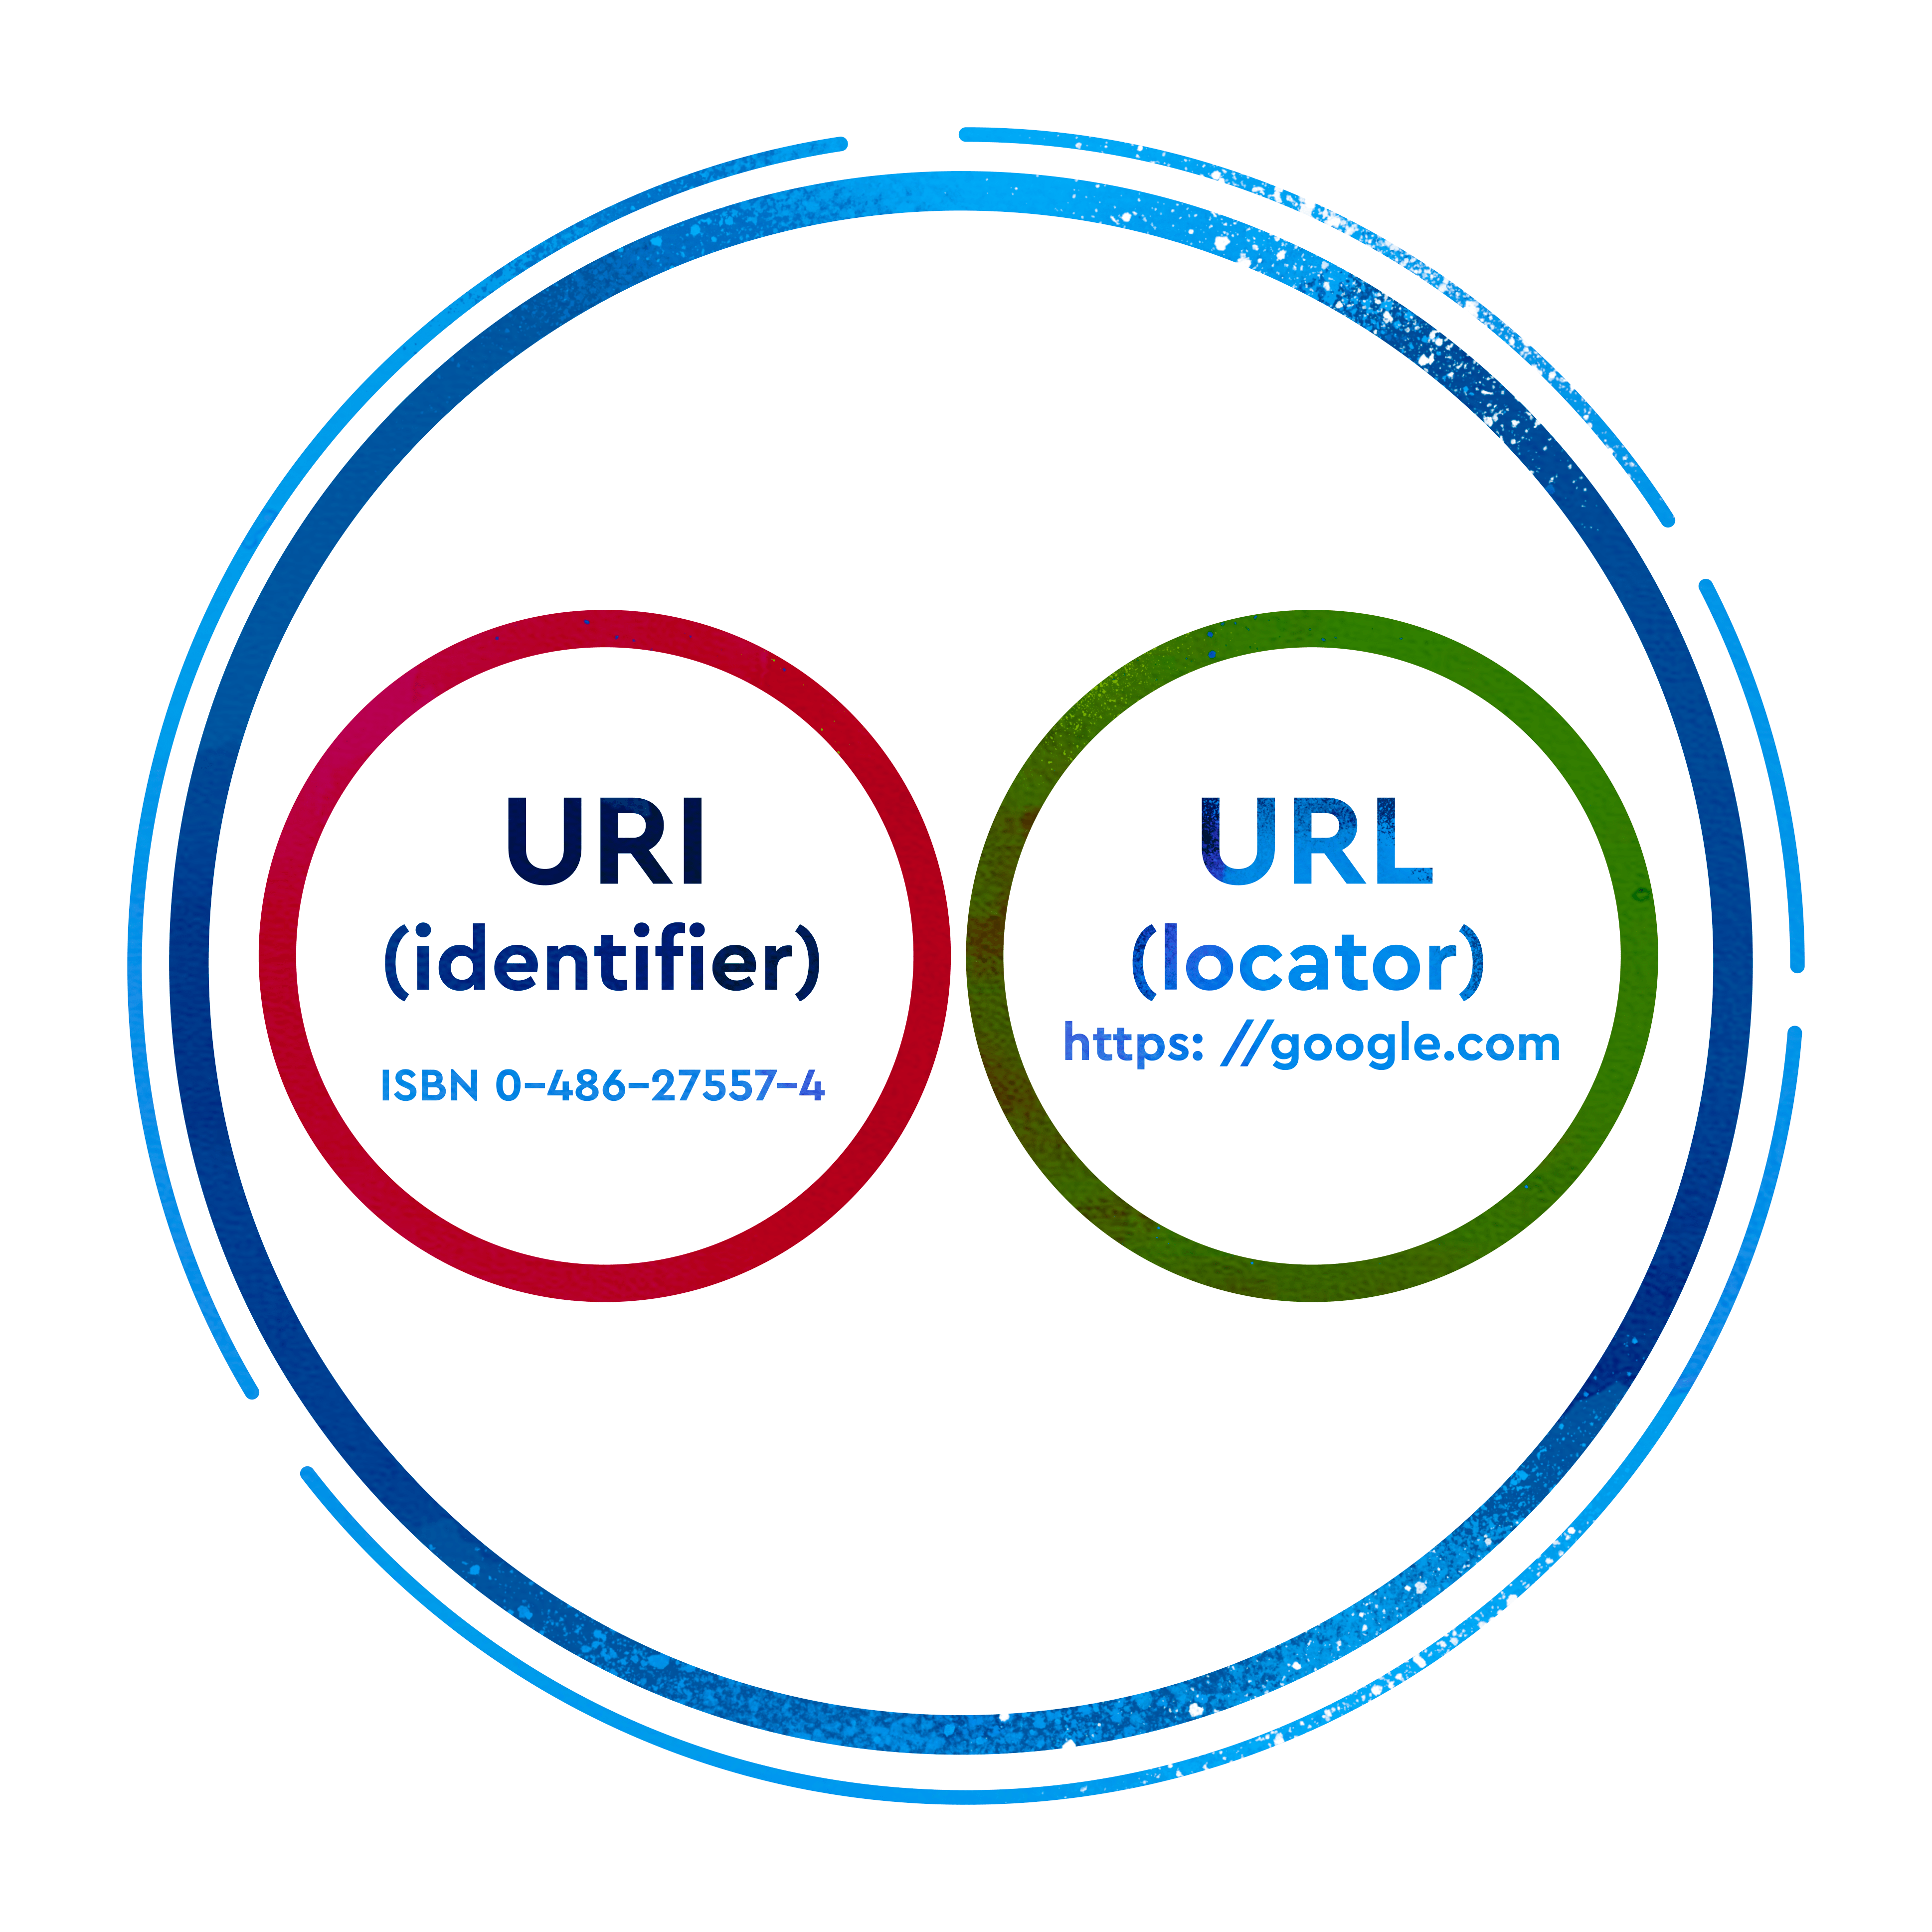 How to create a well-structured SEO-friendly URL